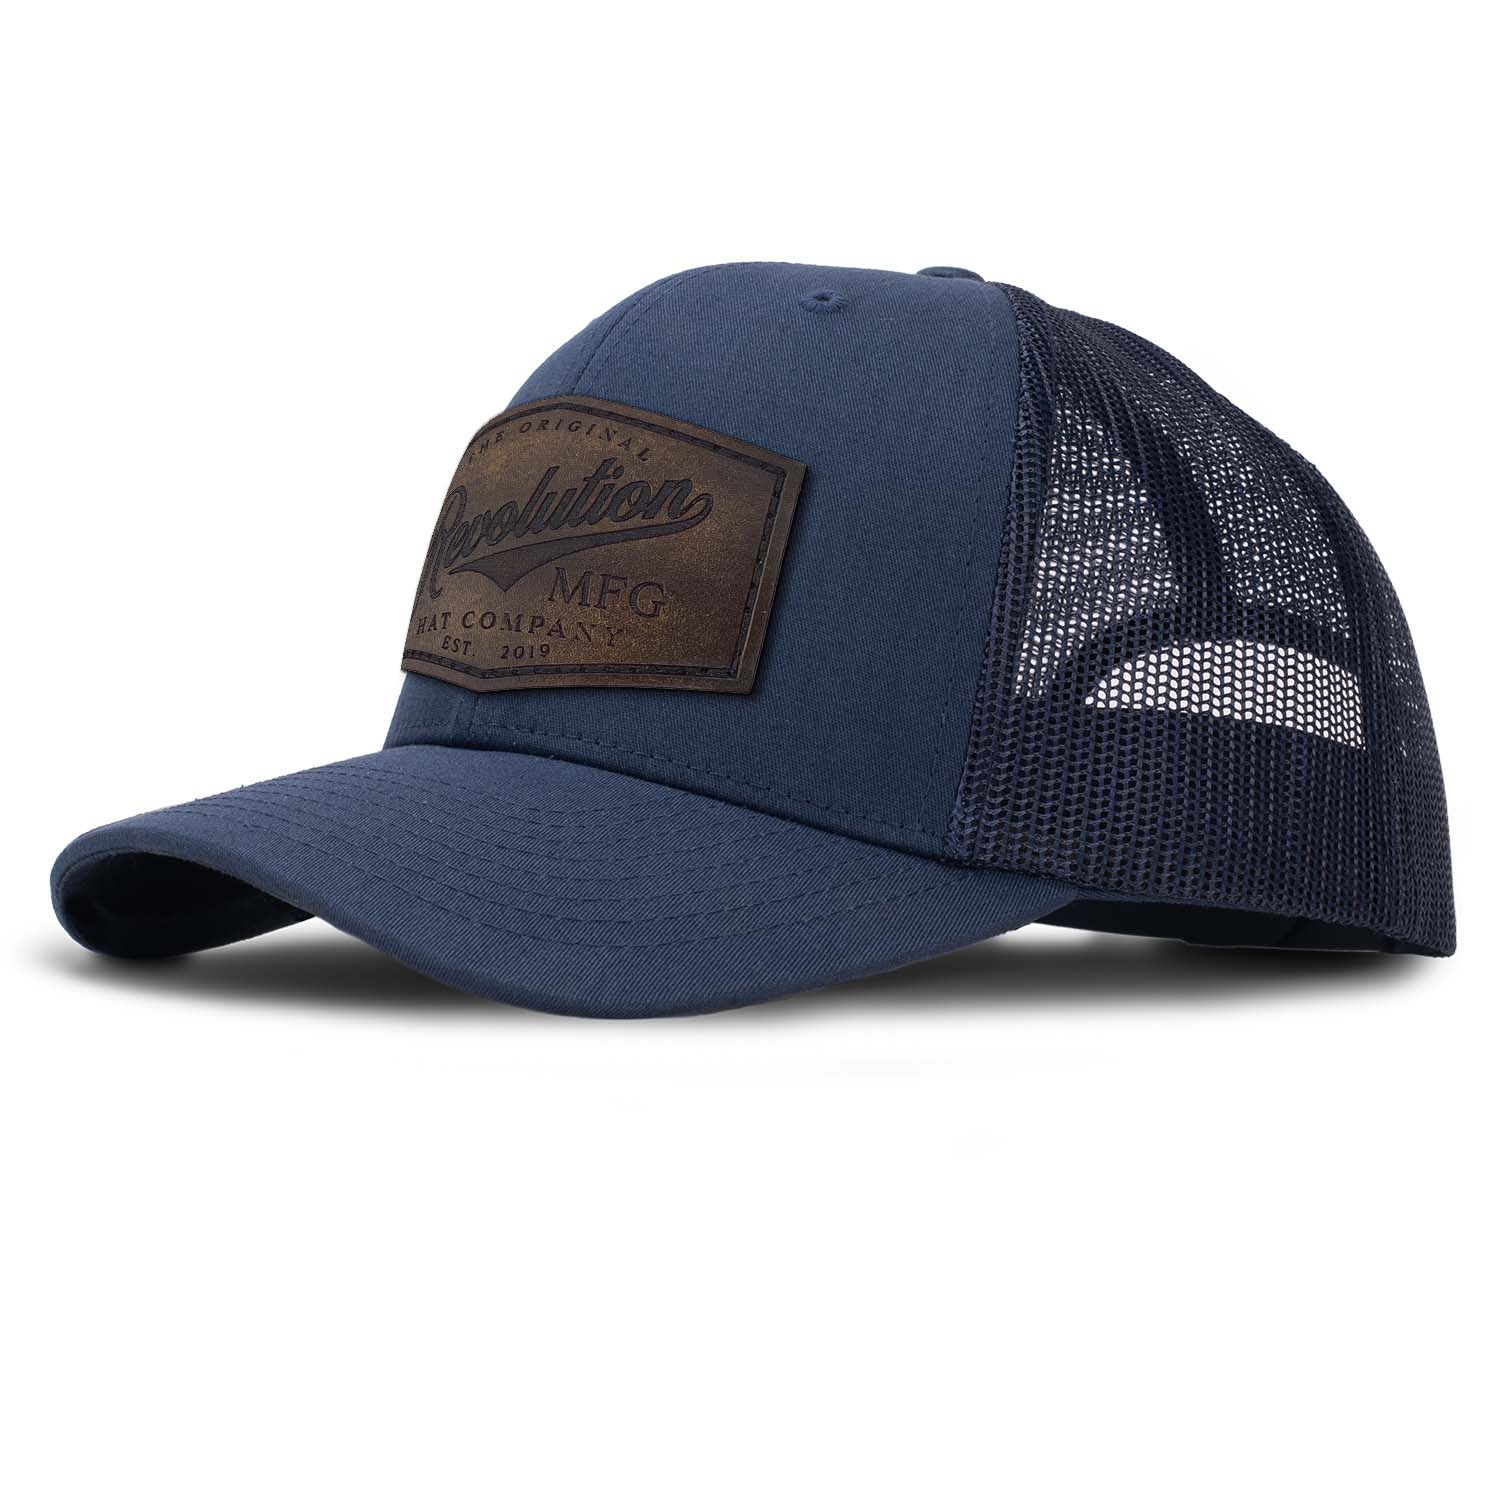 Revolution Mfg Hat Co full grain leather patch on a classic navy trucker hat with navy mesh